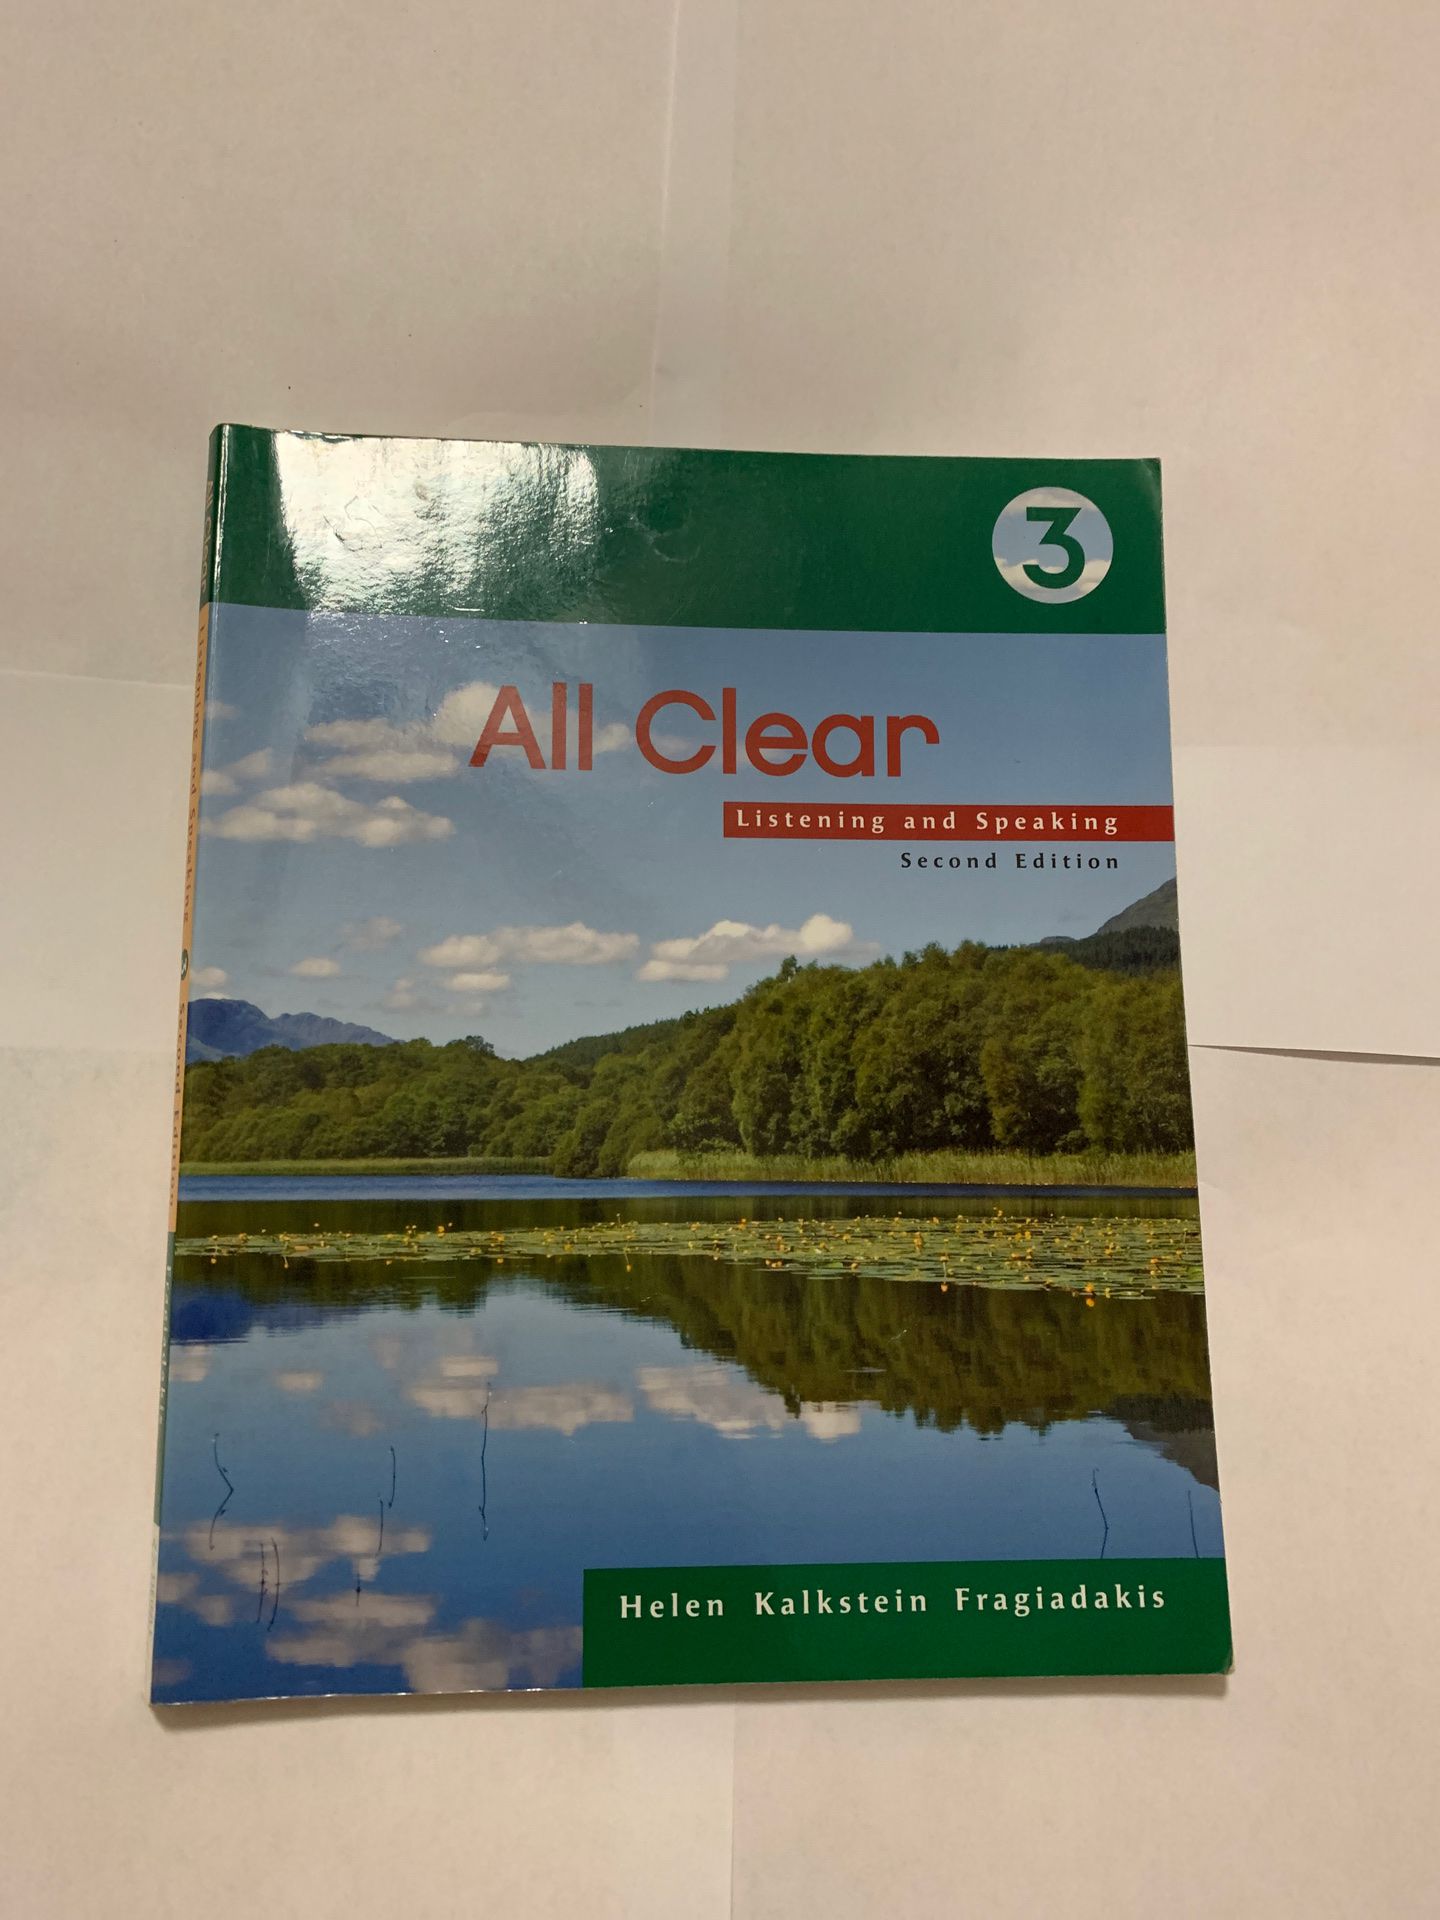 All clear Listening and Speaking (second edition )